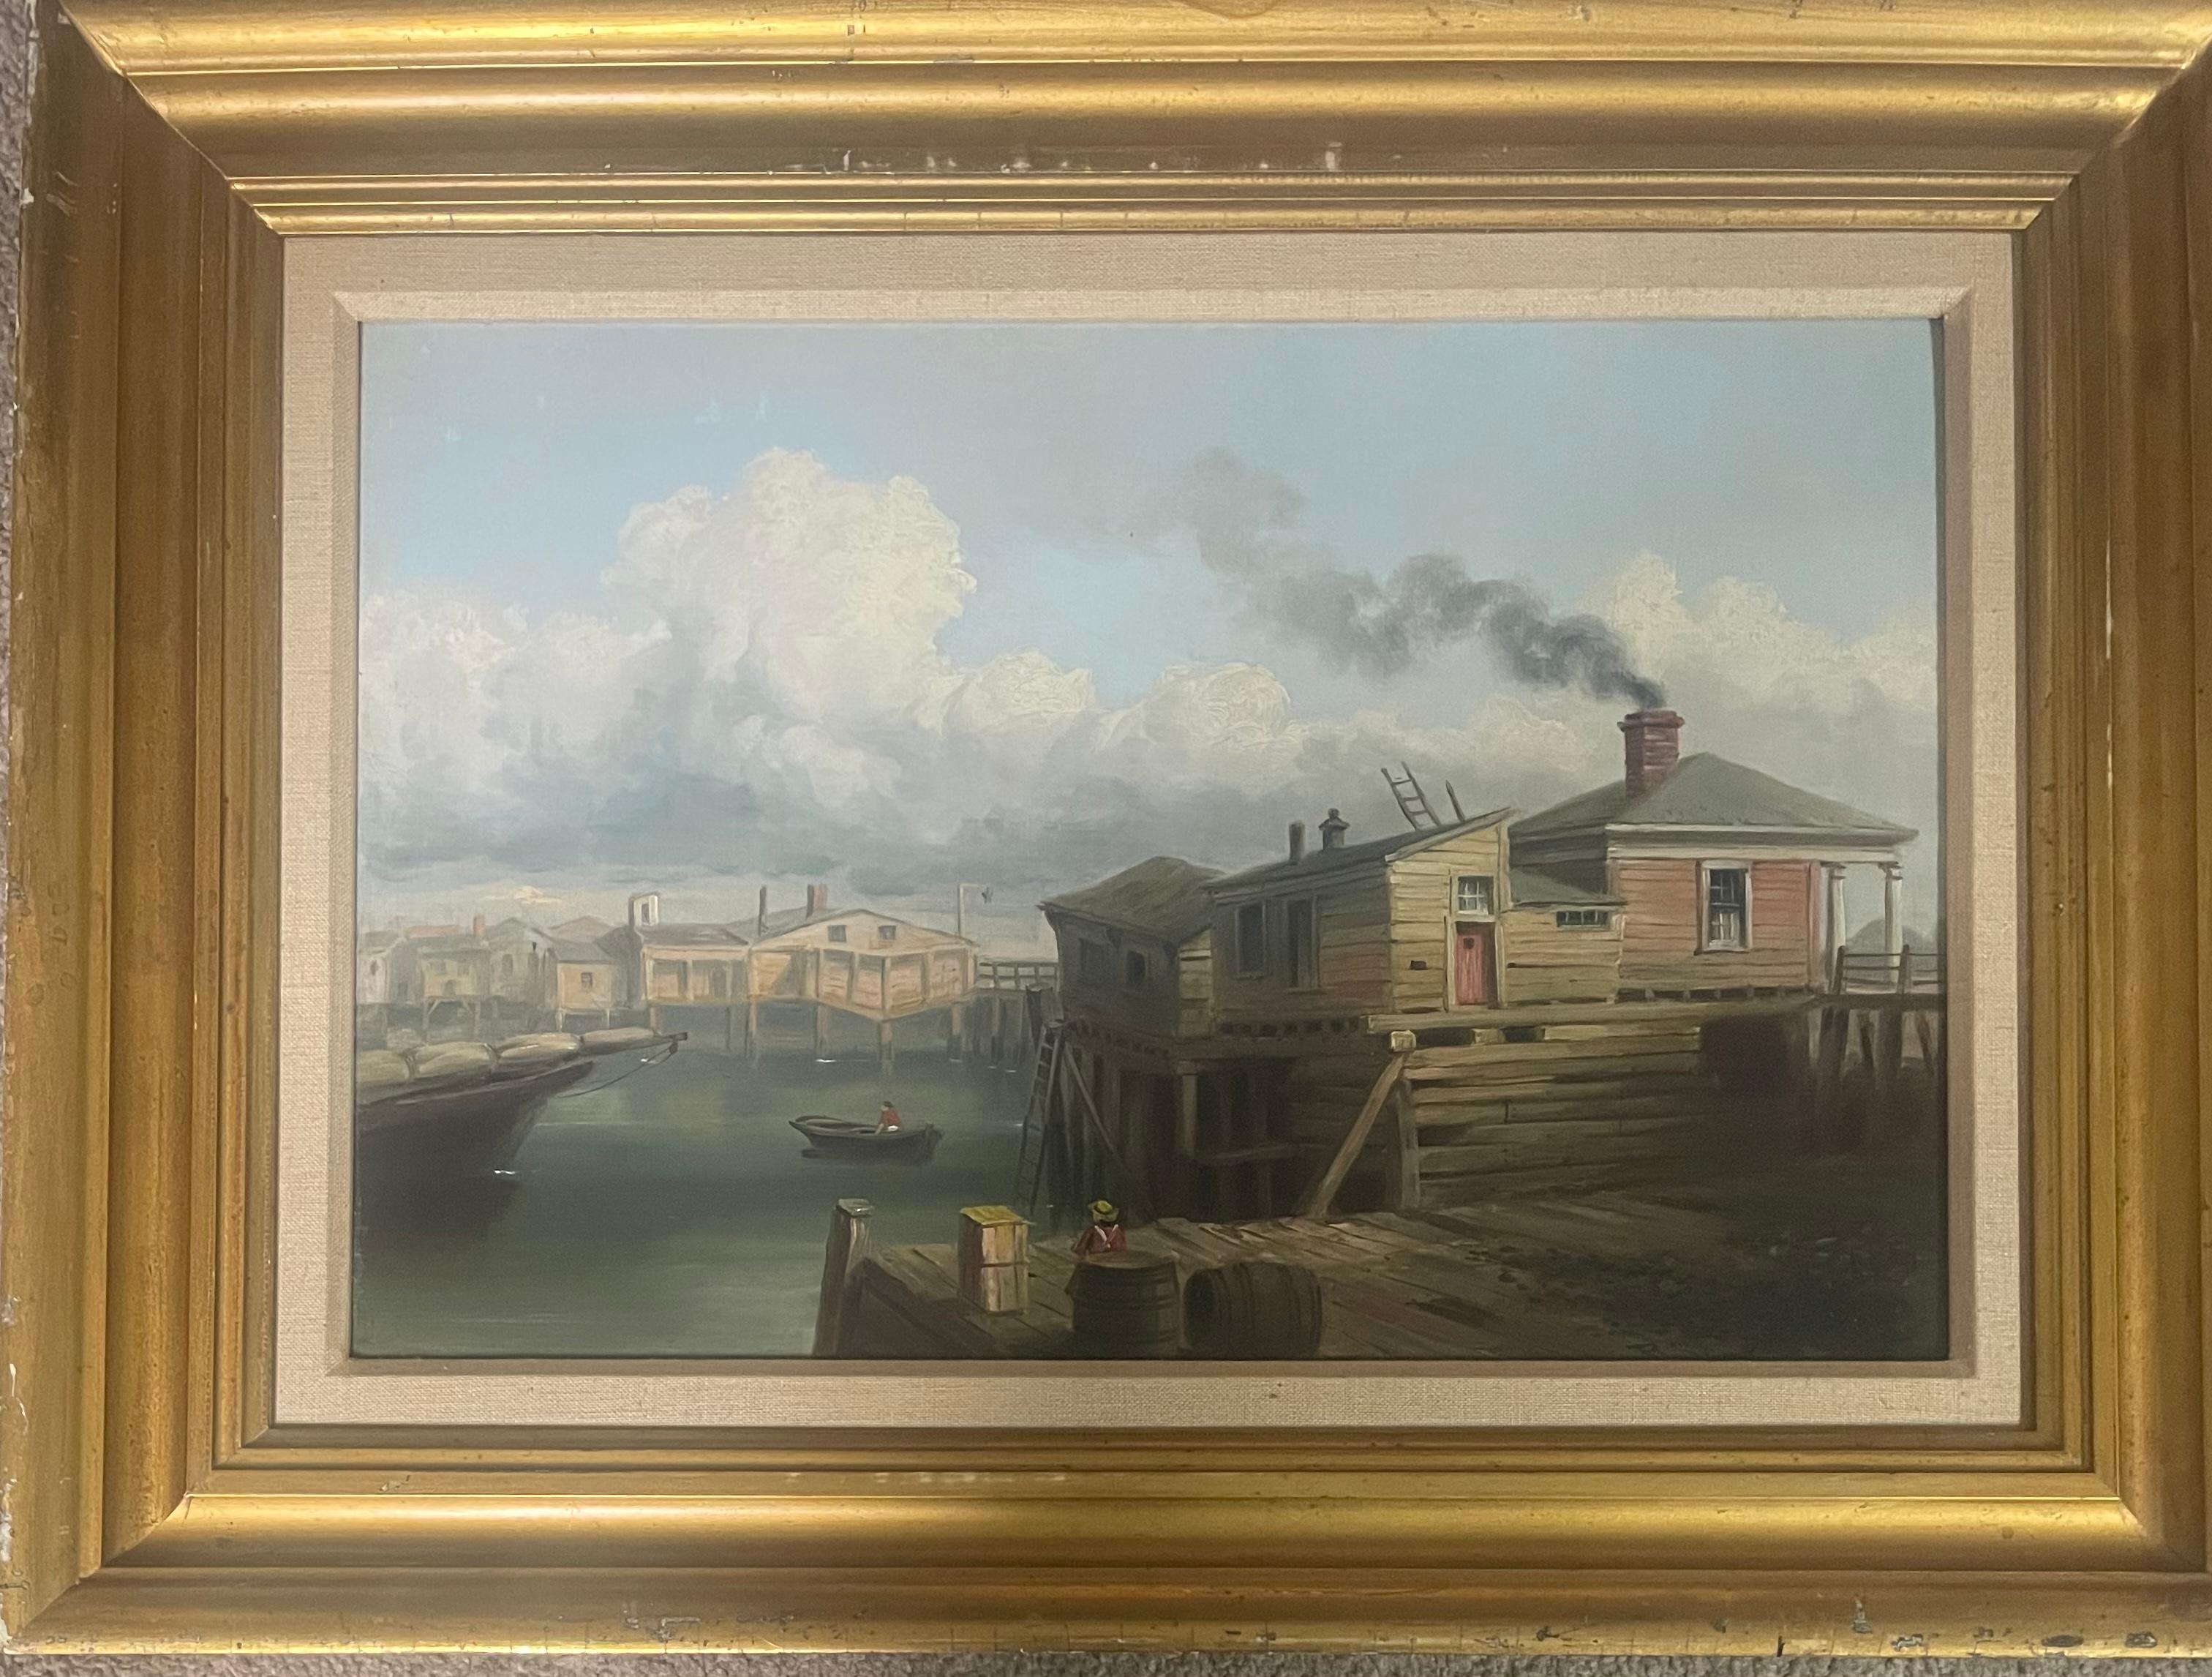 “ Toll House on Back Bay Bridge, Boston, 1836” - Painting by William Russell Smith